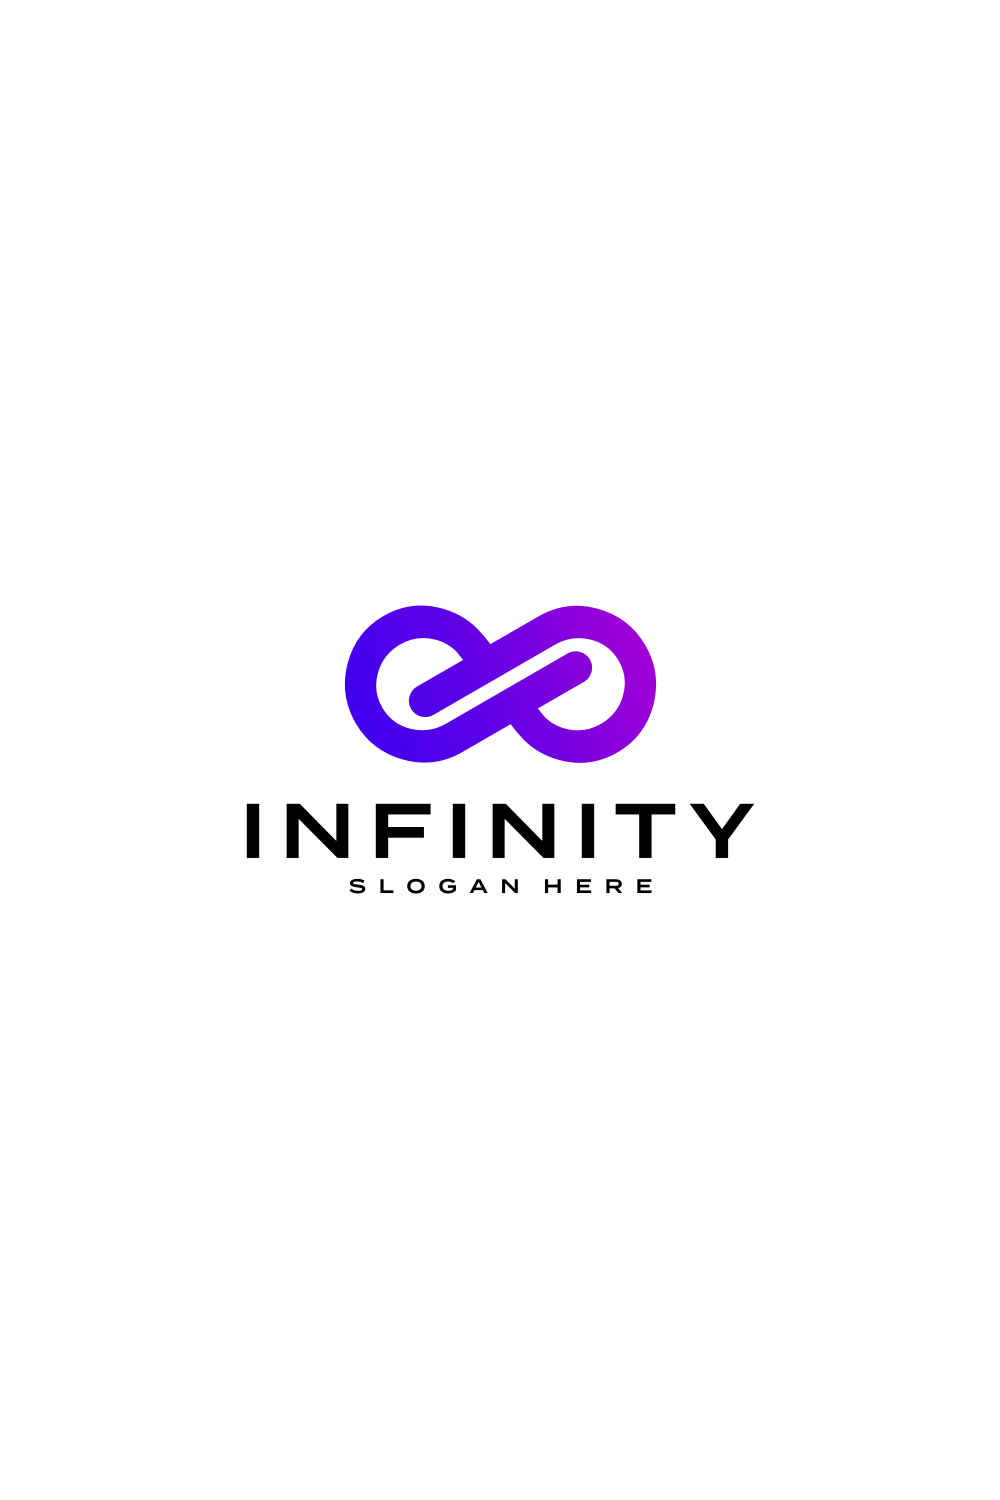 Infinity Tech Logo with Line Art Style pinterest image.